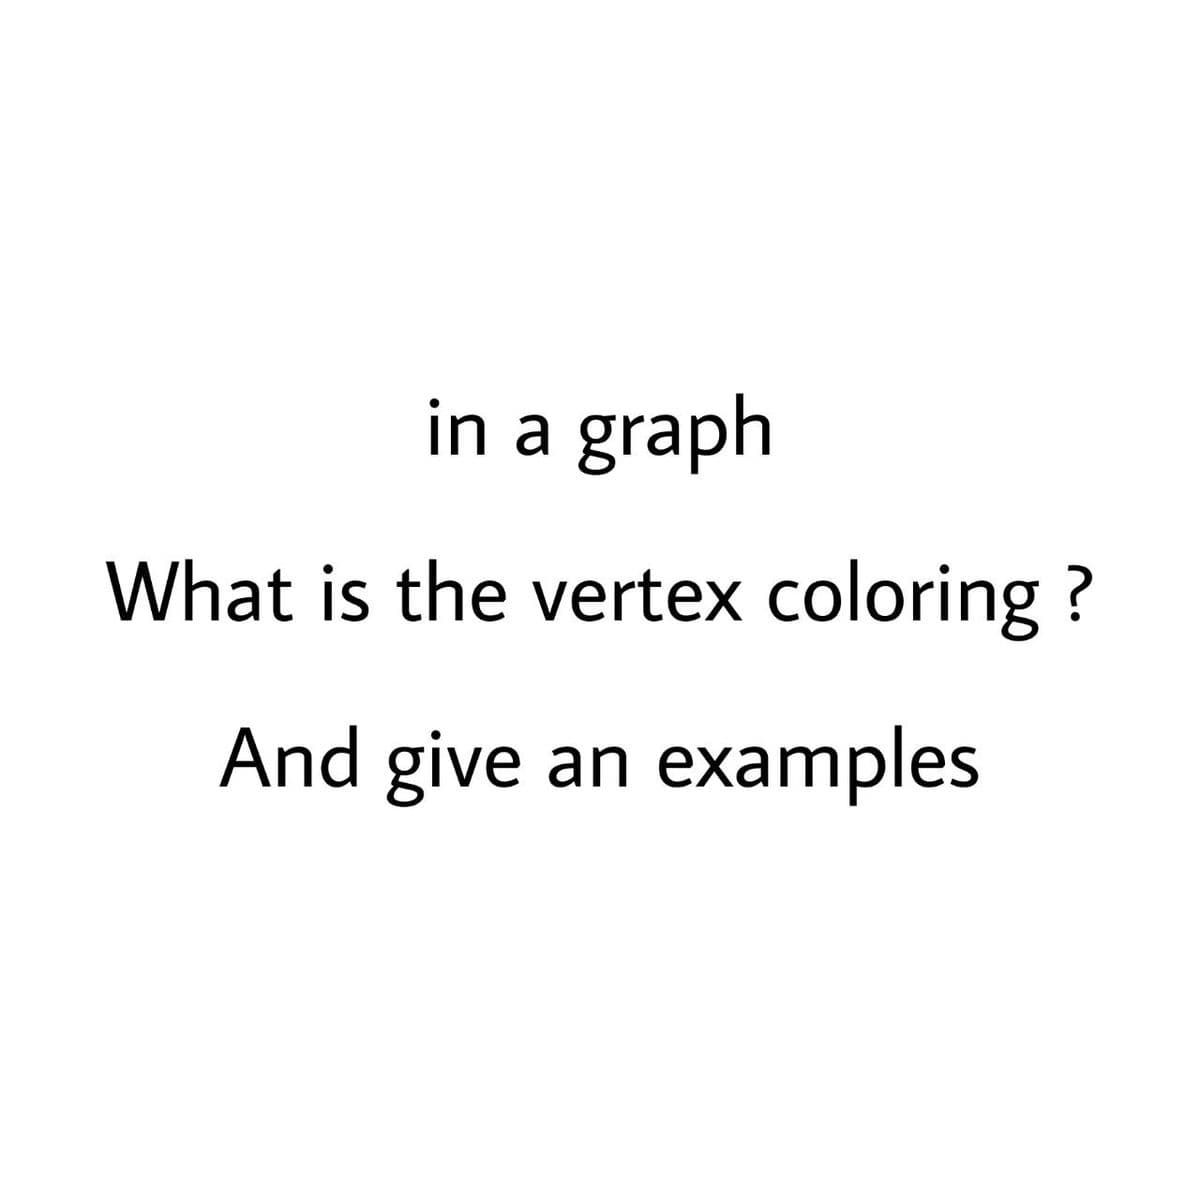 in a graph
What is the vertex coloring ?
And give an examples
